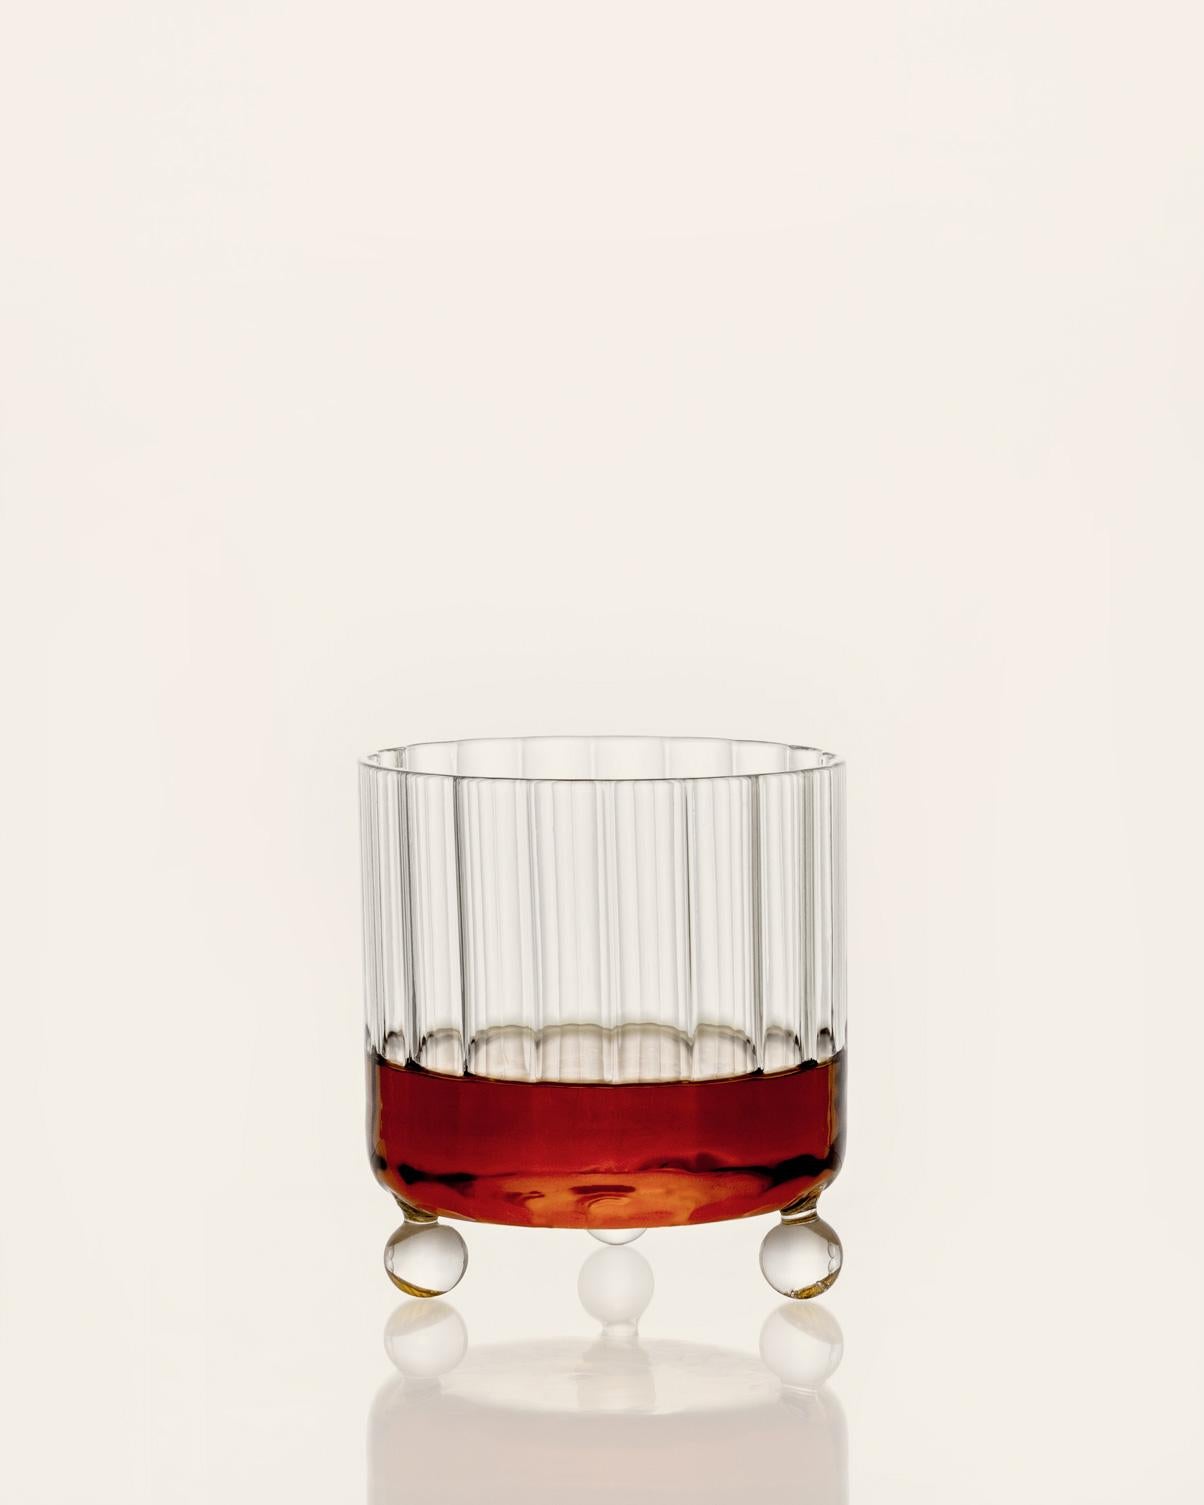 Italian Contemporary High Spirits Lowball Glass by Agustina Bottoni — Handmade in Italy For Sale